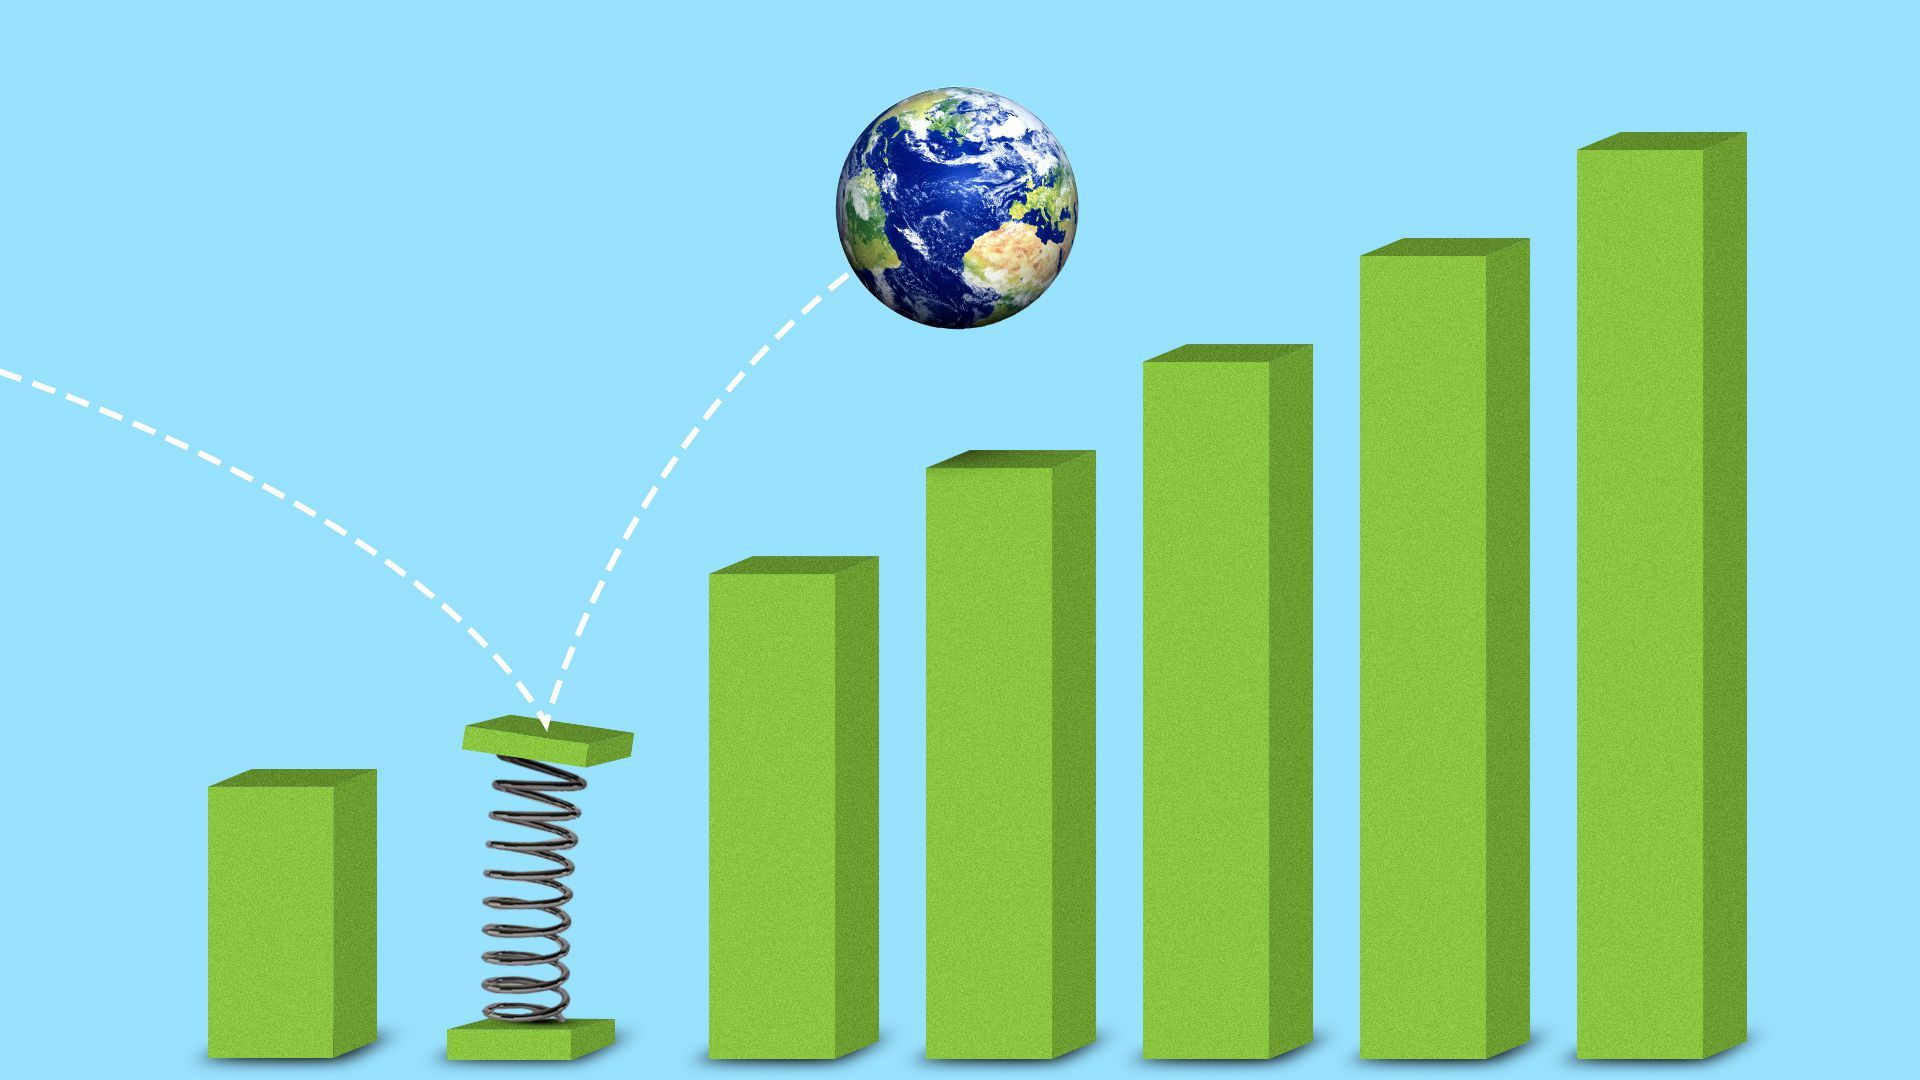 Illustration of an upward trending bar chart with one of the bars as a springboard, springing the Earth over the proceeding bars. 